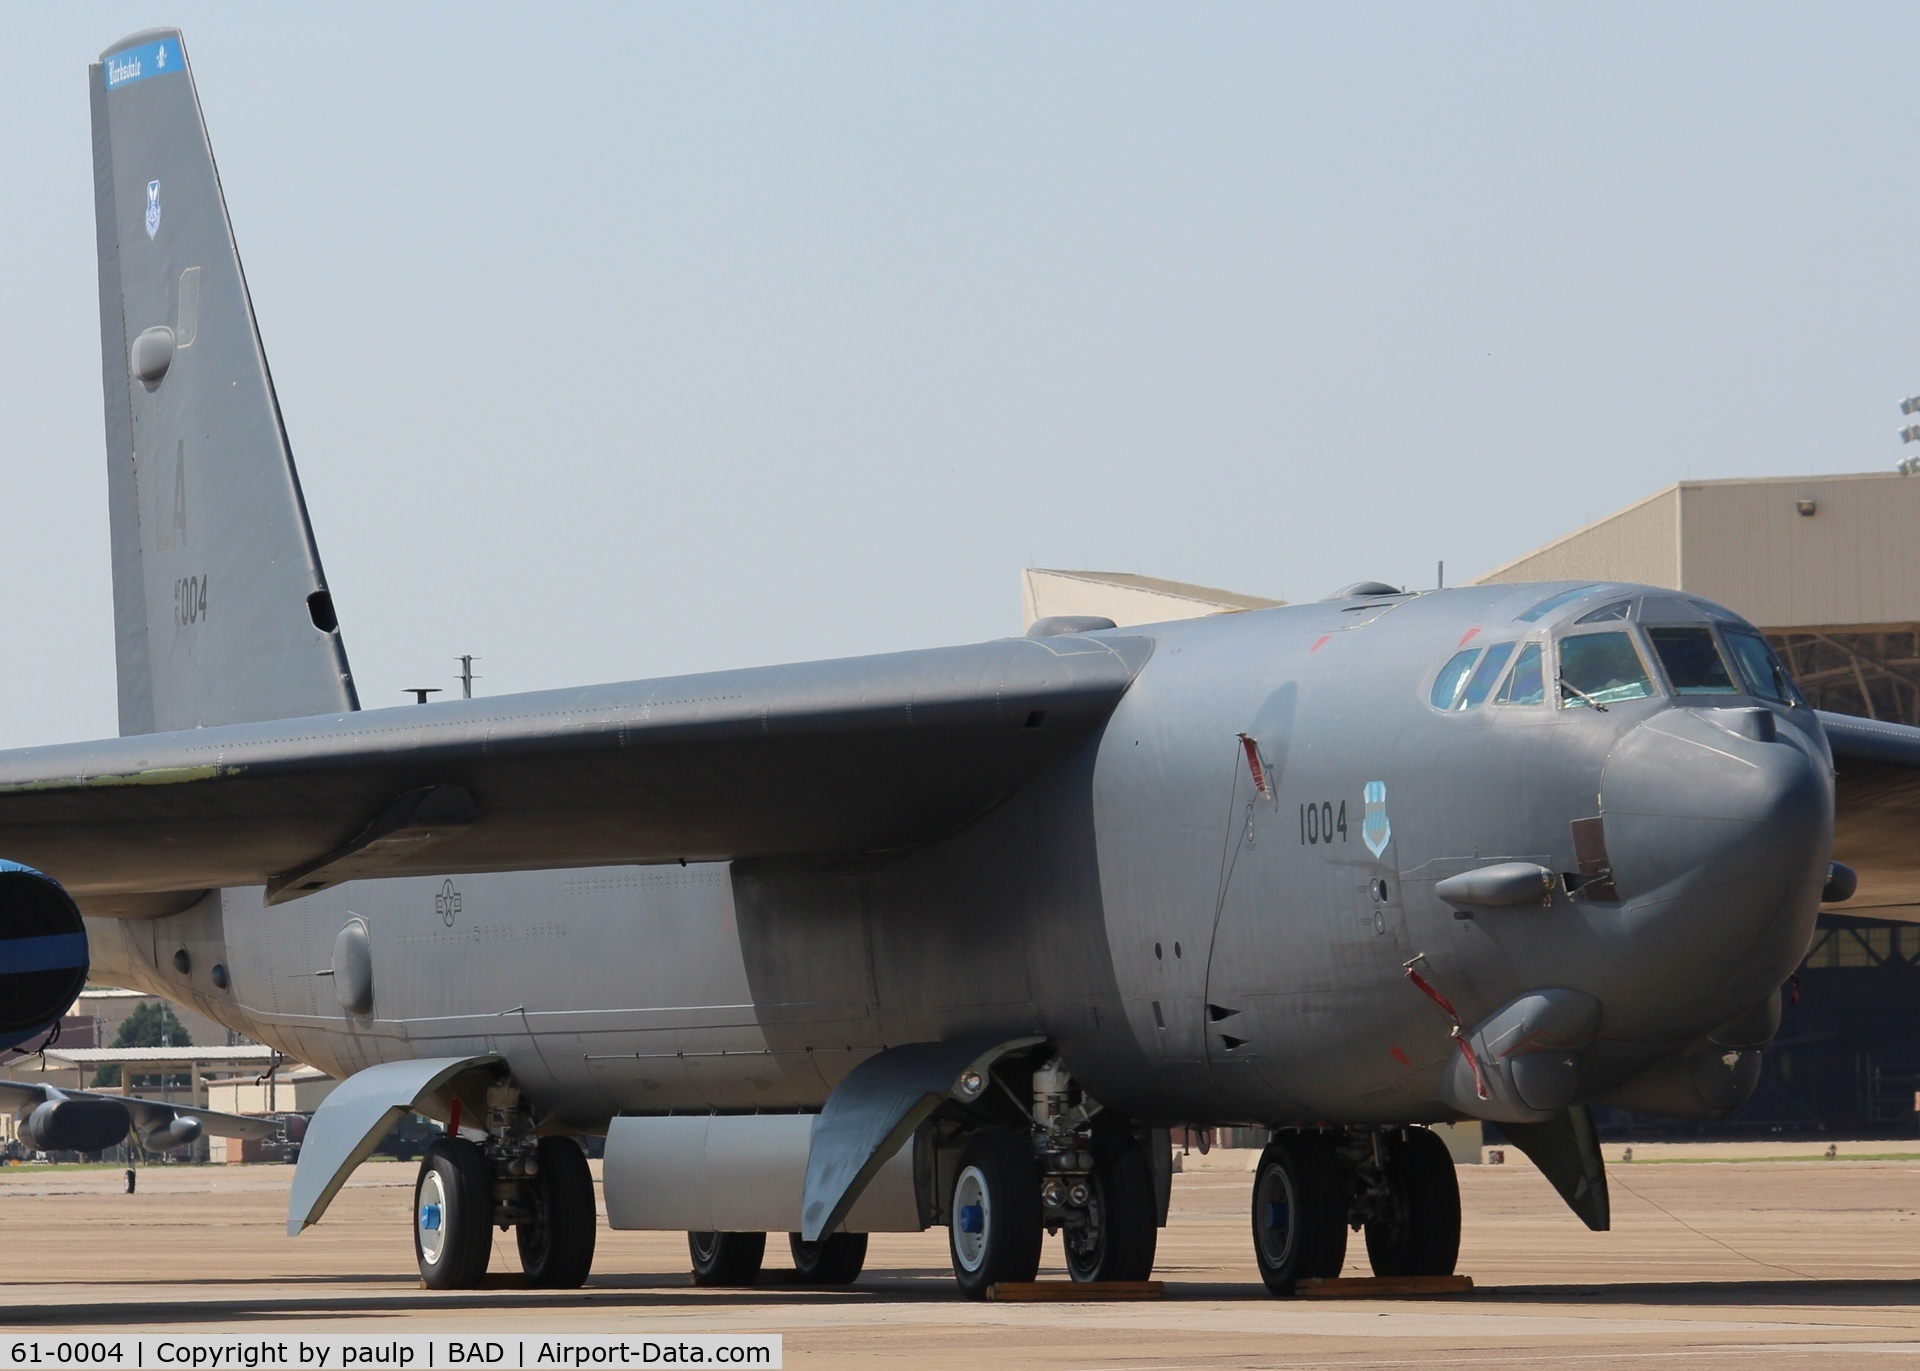 61-0004, 1961 Boeing B-52H Stratofortress C/N 464431, At Barksdale Air Force Base.